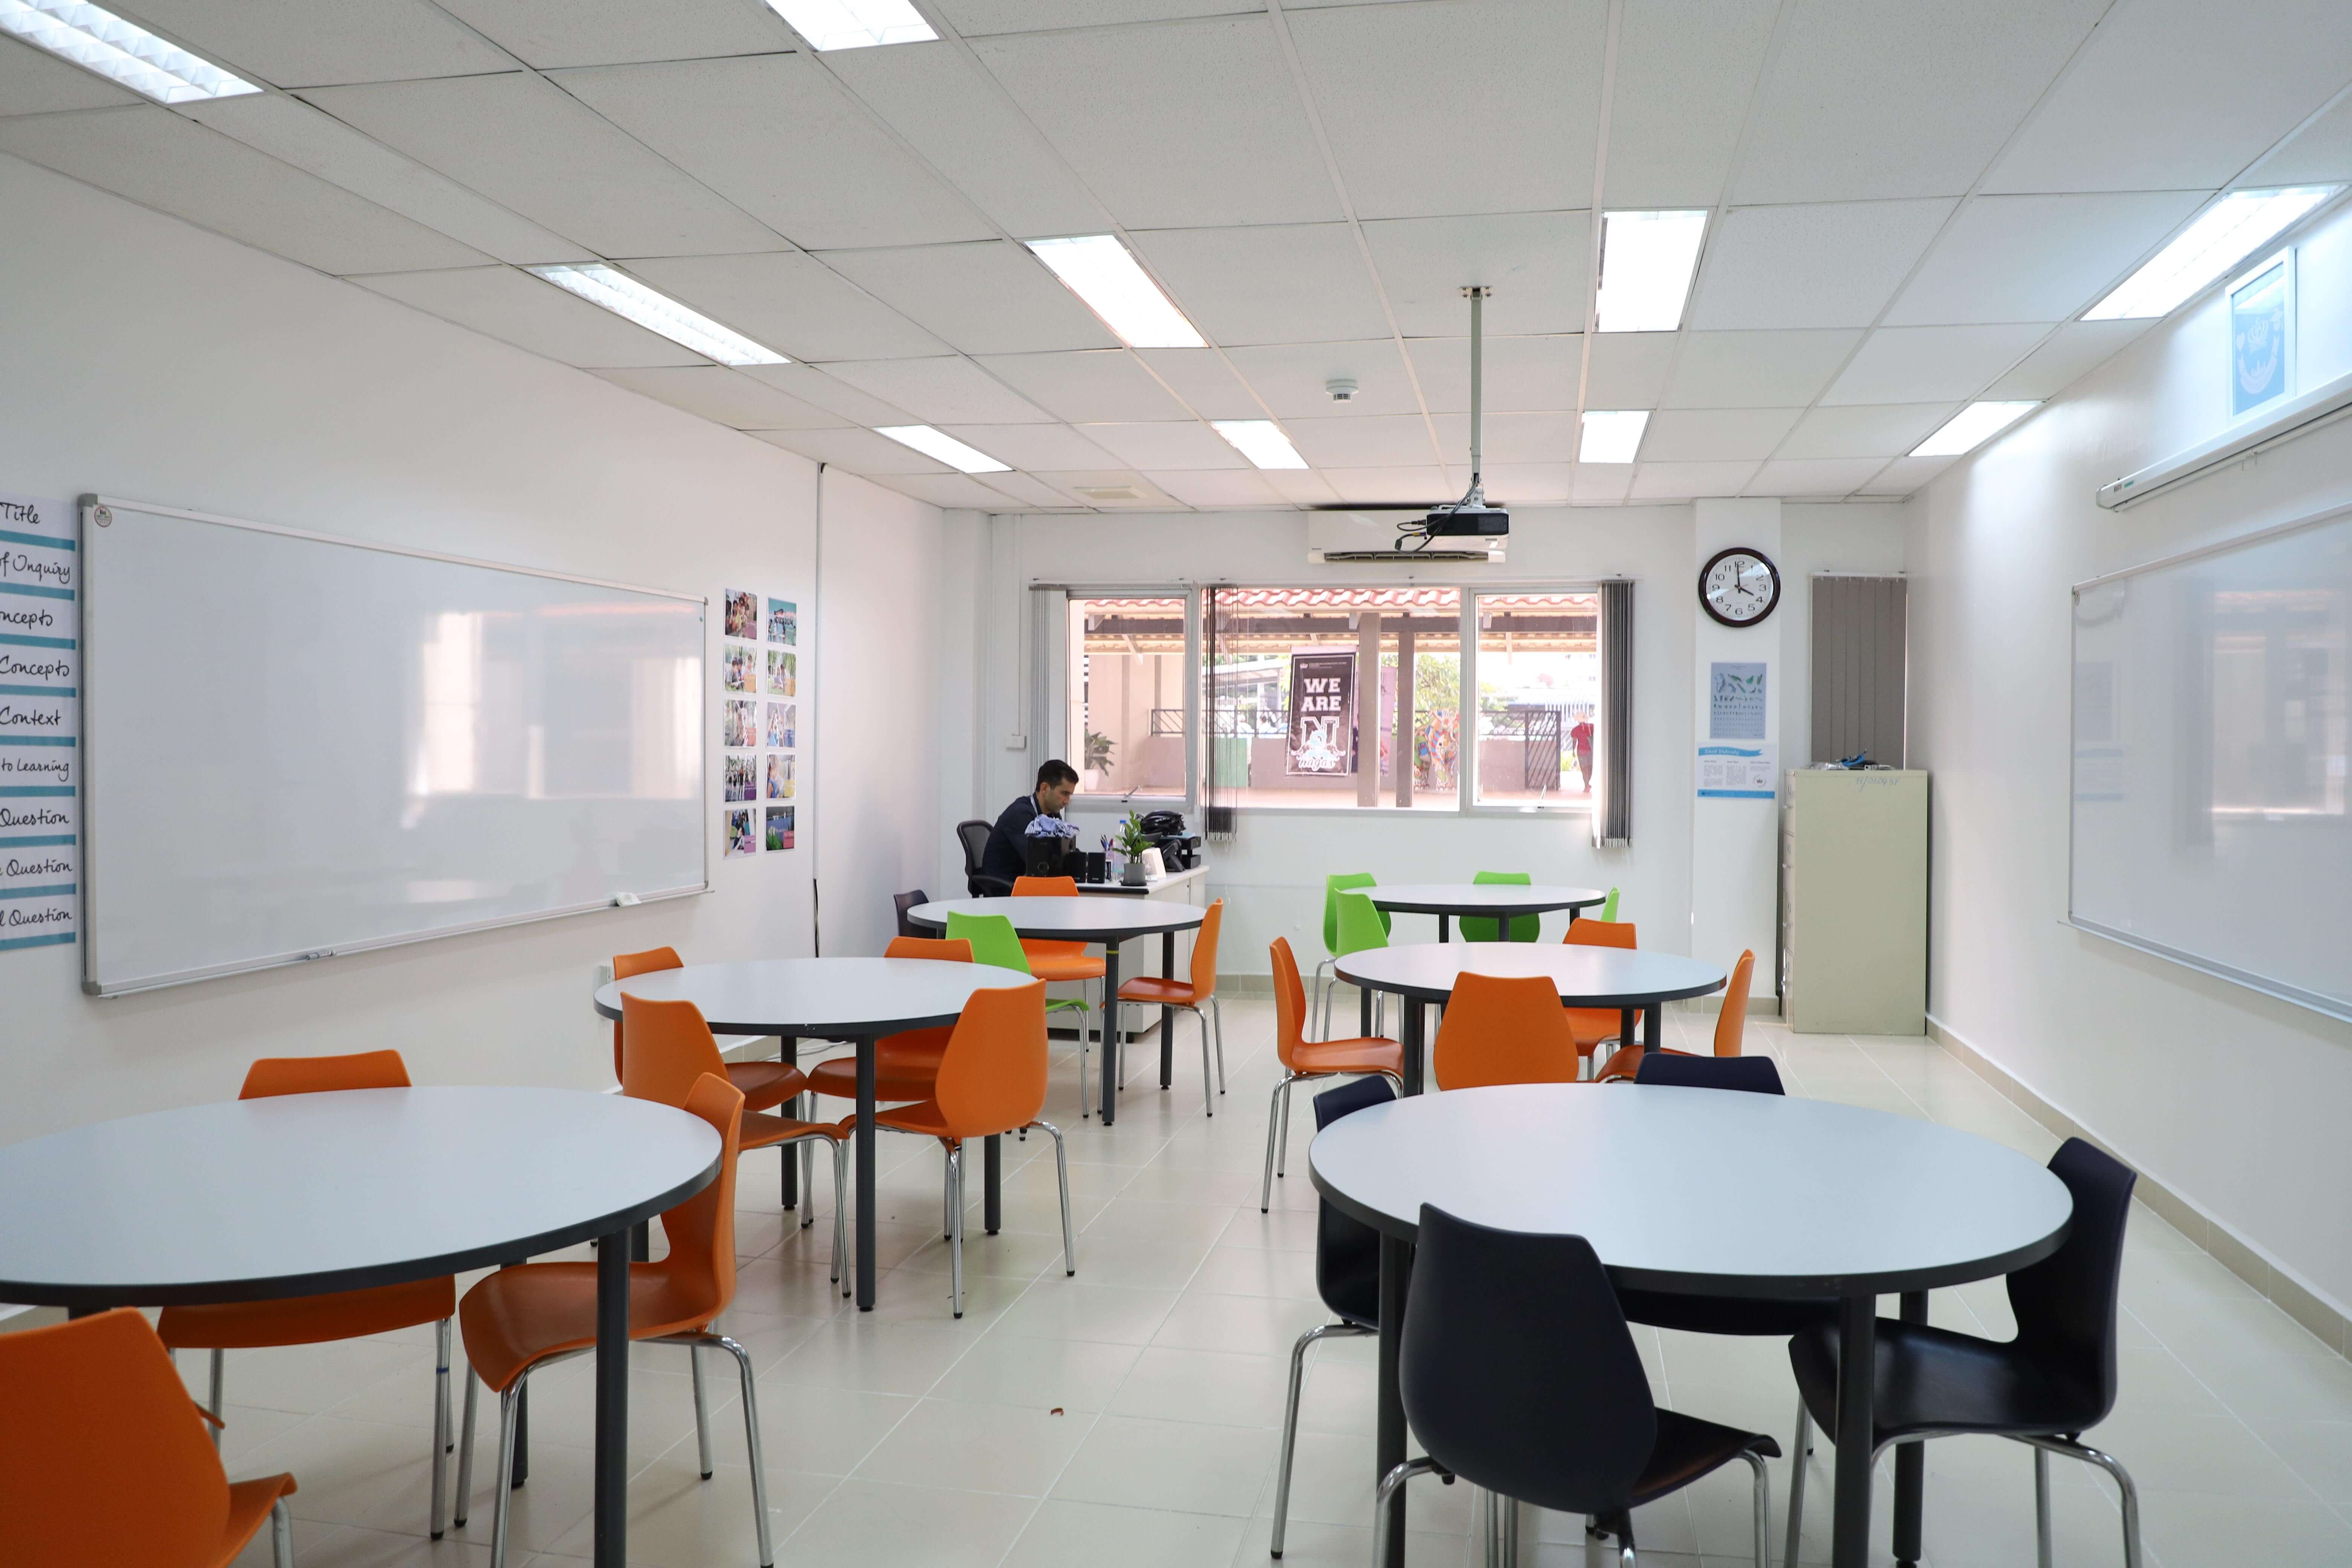 New Northbridge campus developments revealed after busy summer of improvements-new-northbridge-campus-developments-revealed-after-busy-summer-of-improvements-Facilities updated 201945